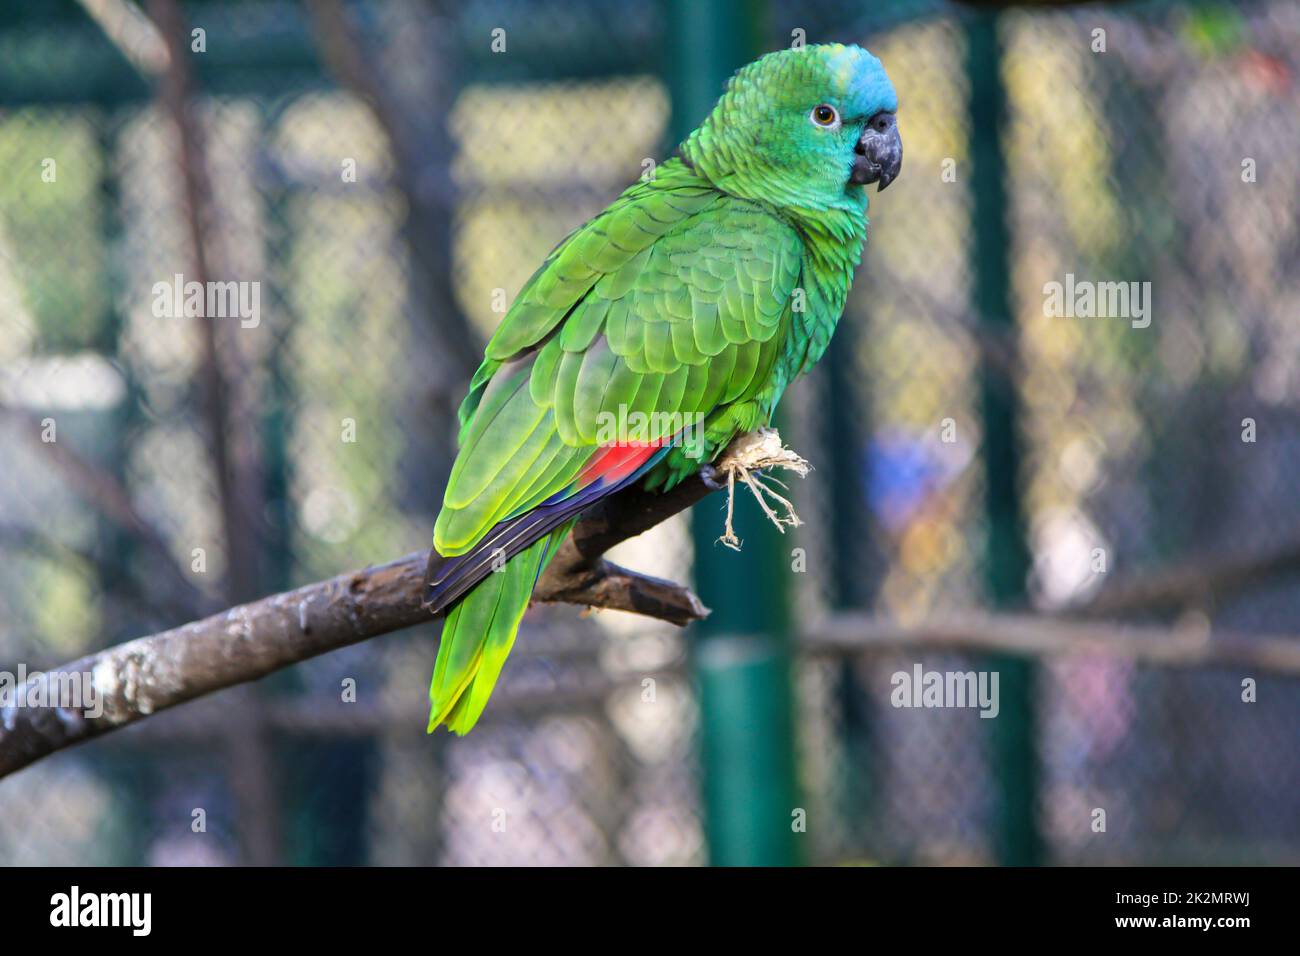 Parrot in an aviary. Parrot birds with beautiful plumage. Stock Photo